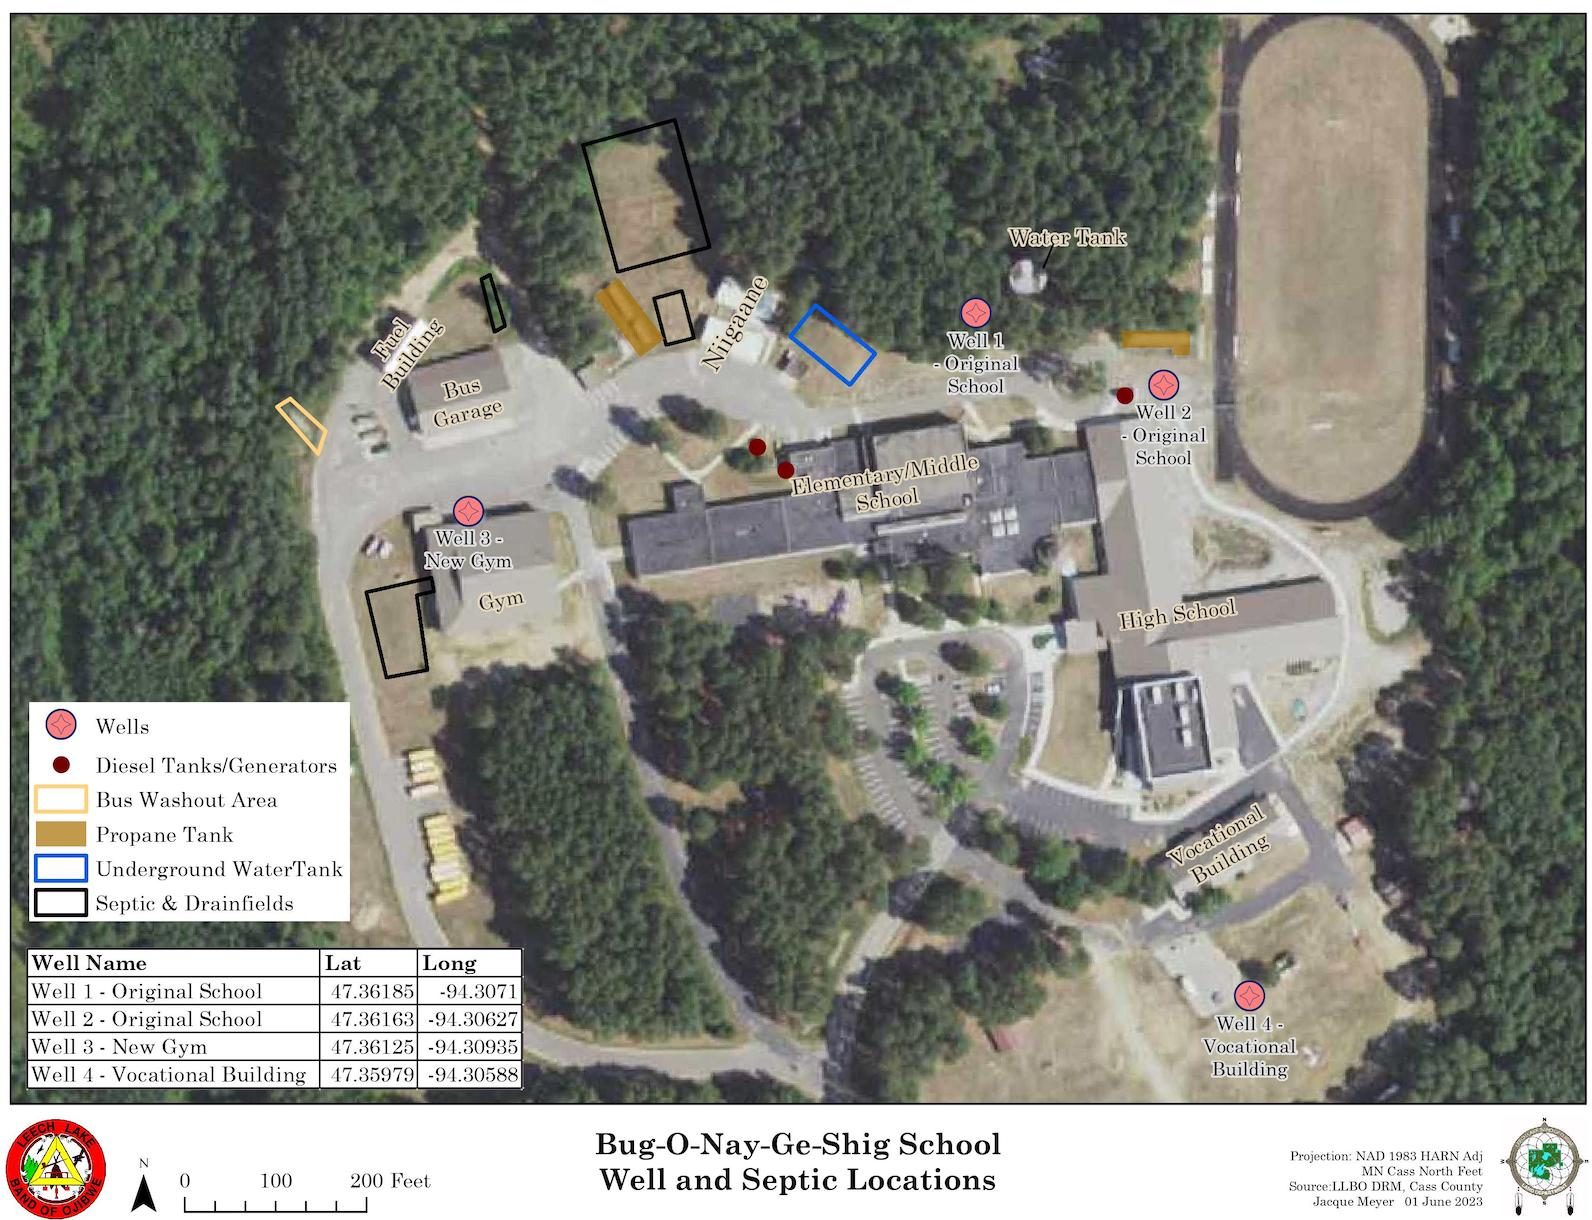 A satellite map of a school with wells labeled